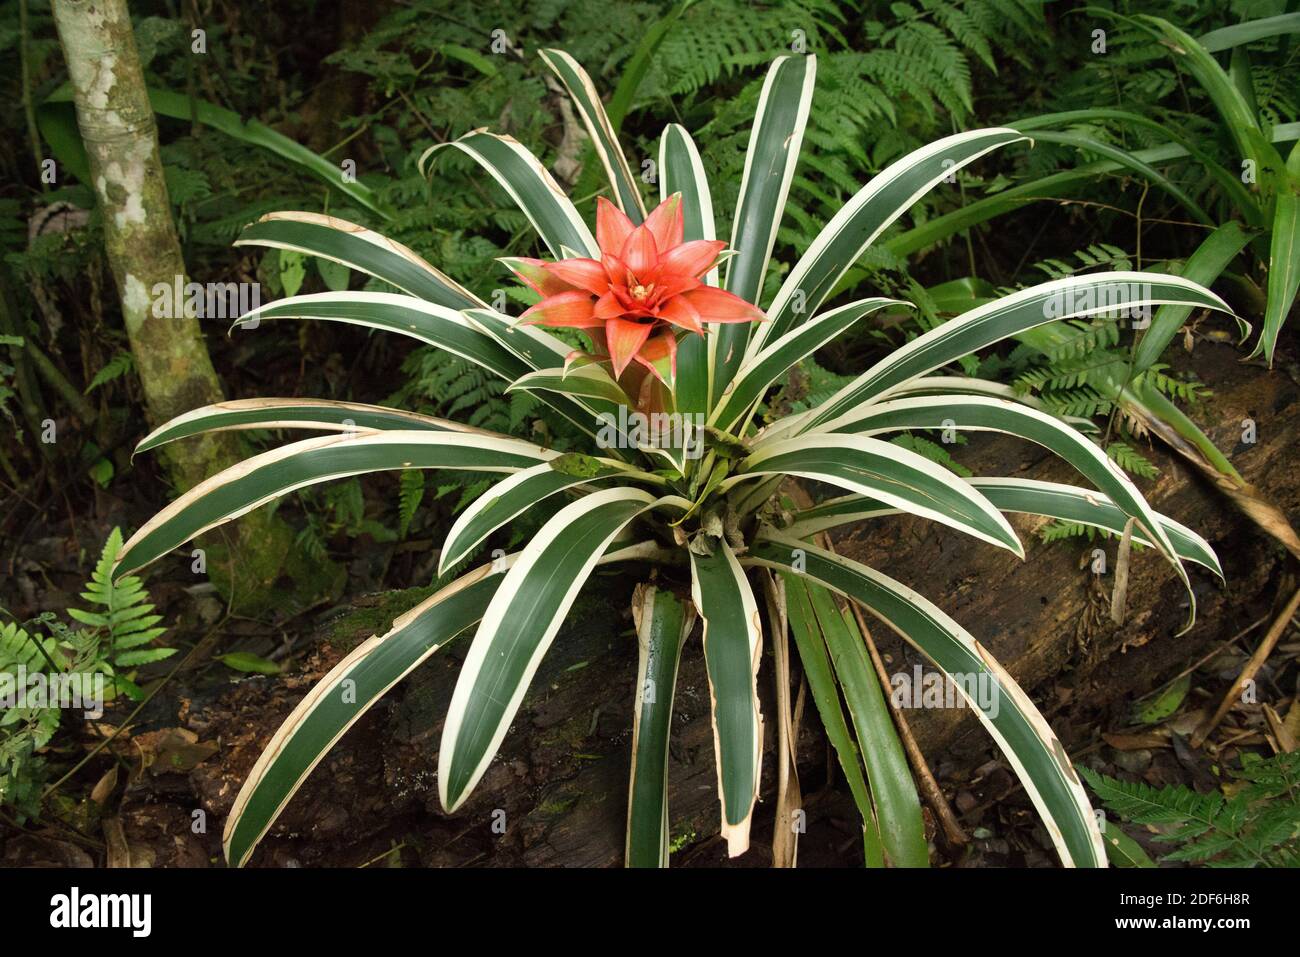 Scarlet star (Guzmania lingulata) is an epiphytic and perennial plant native to tropical America. Stock Photo